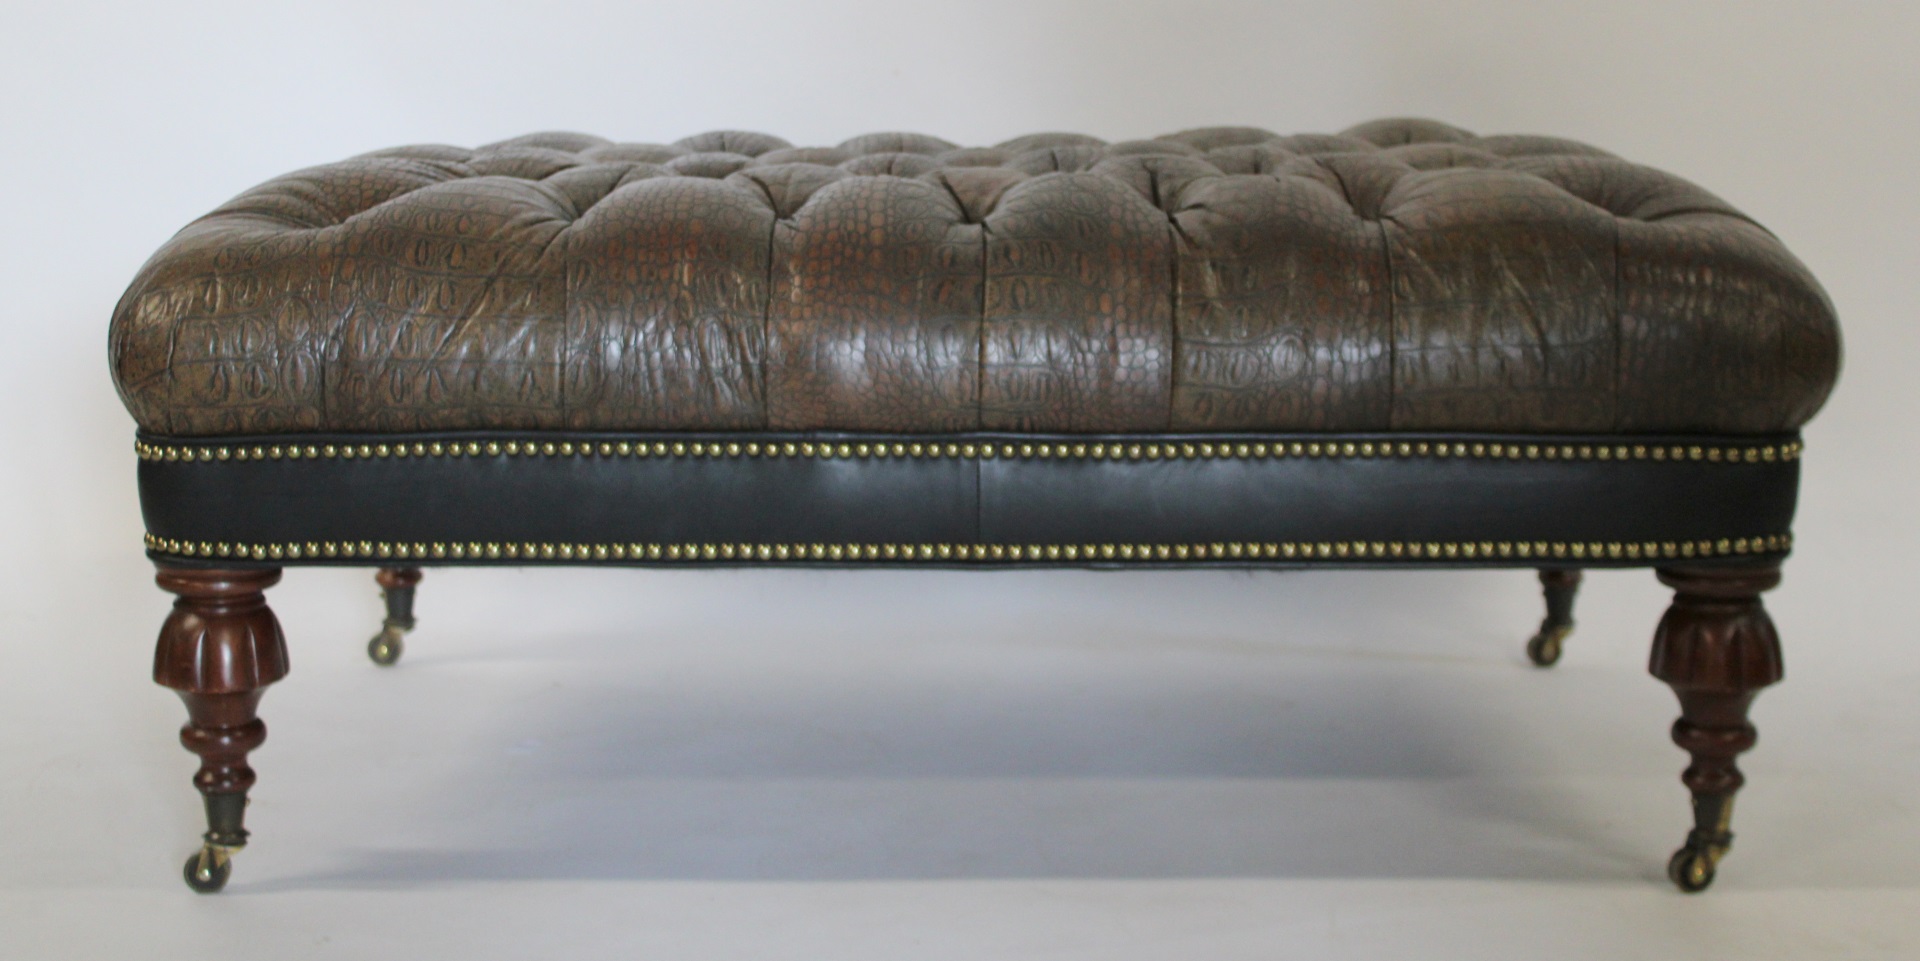 VINTAGE UPHOLSTERED OTTOMAN IN 3bcb88